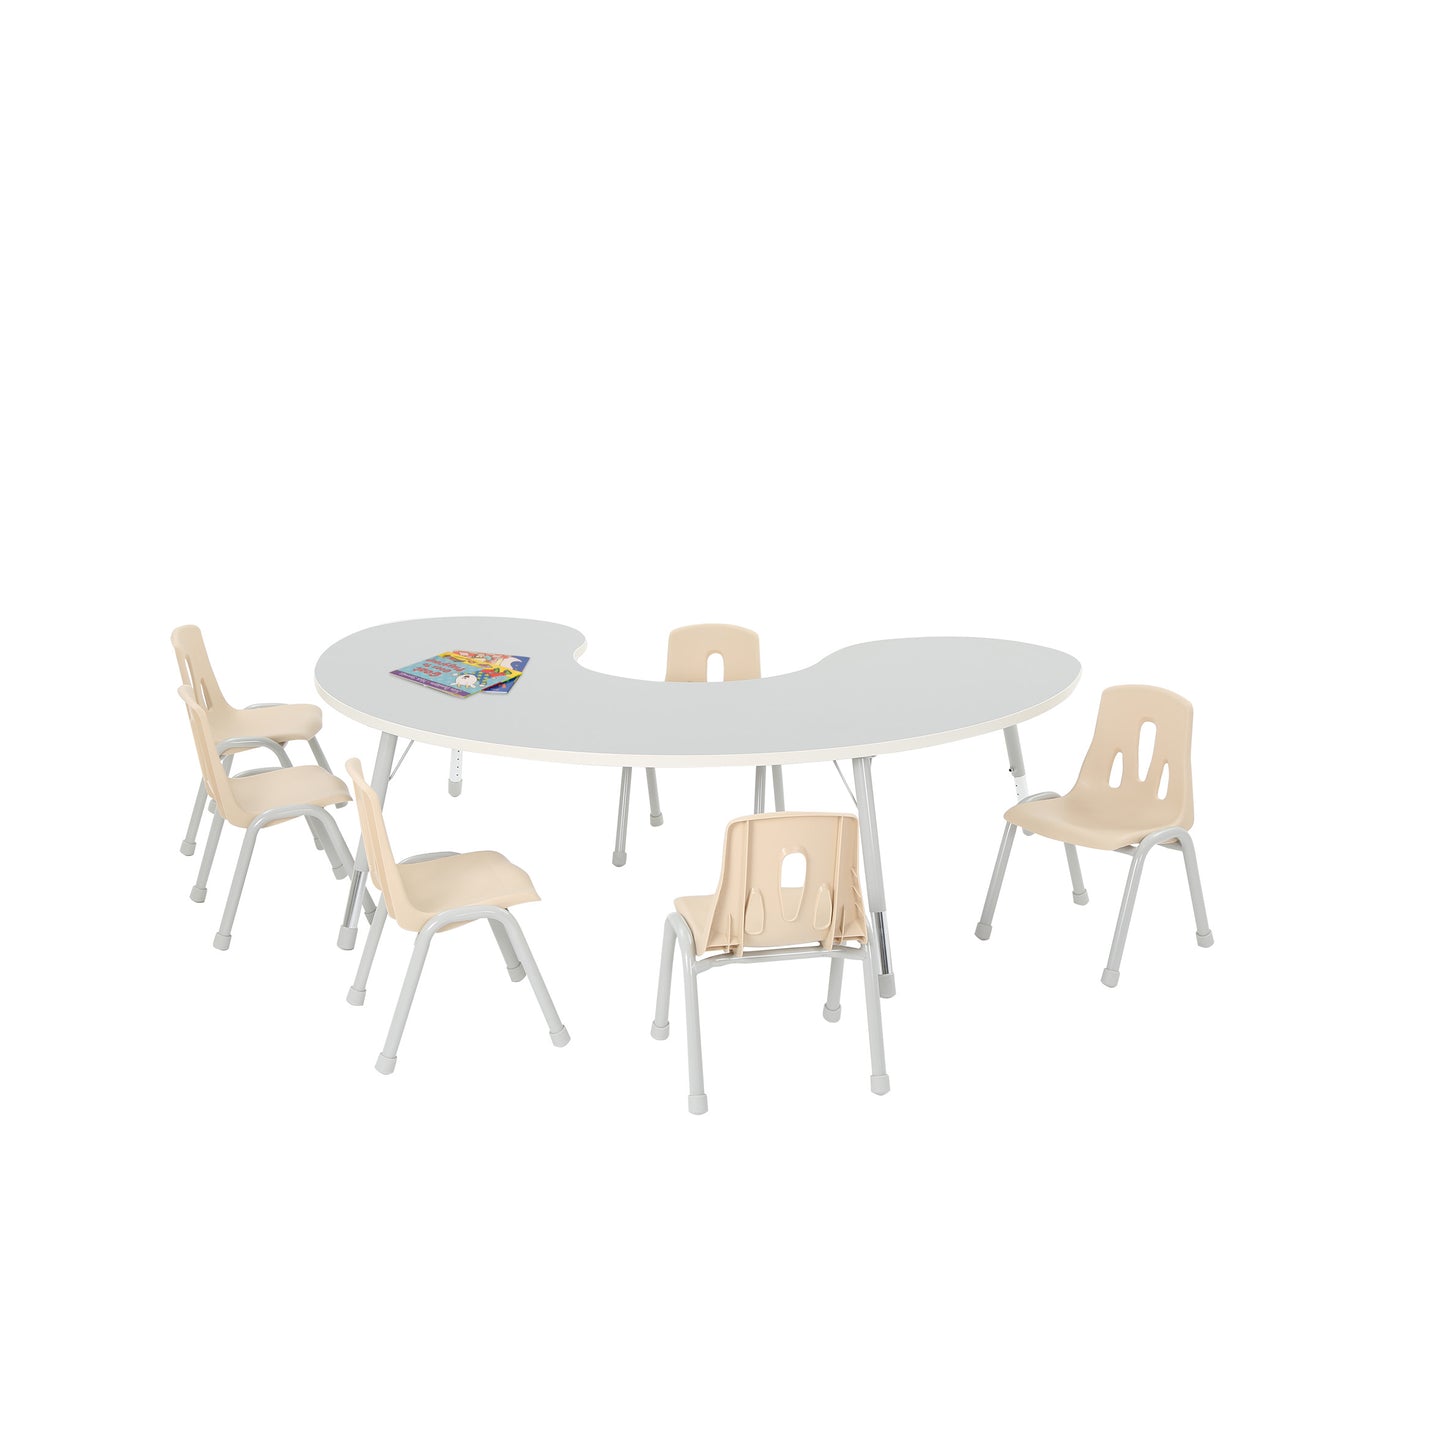 Thrifty Group Table 6 Seater – Grey